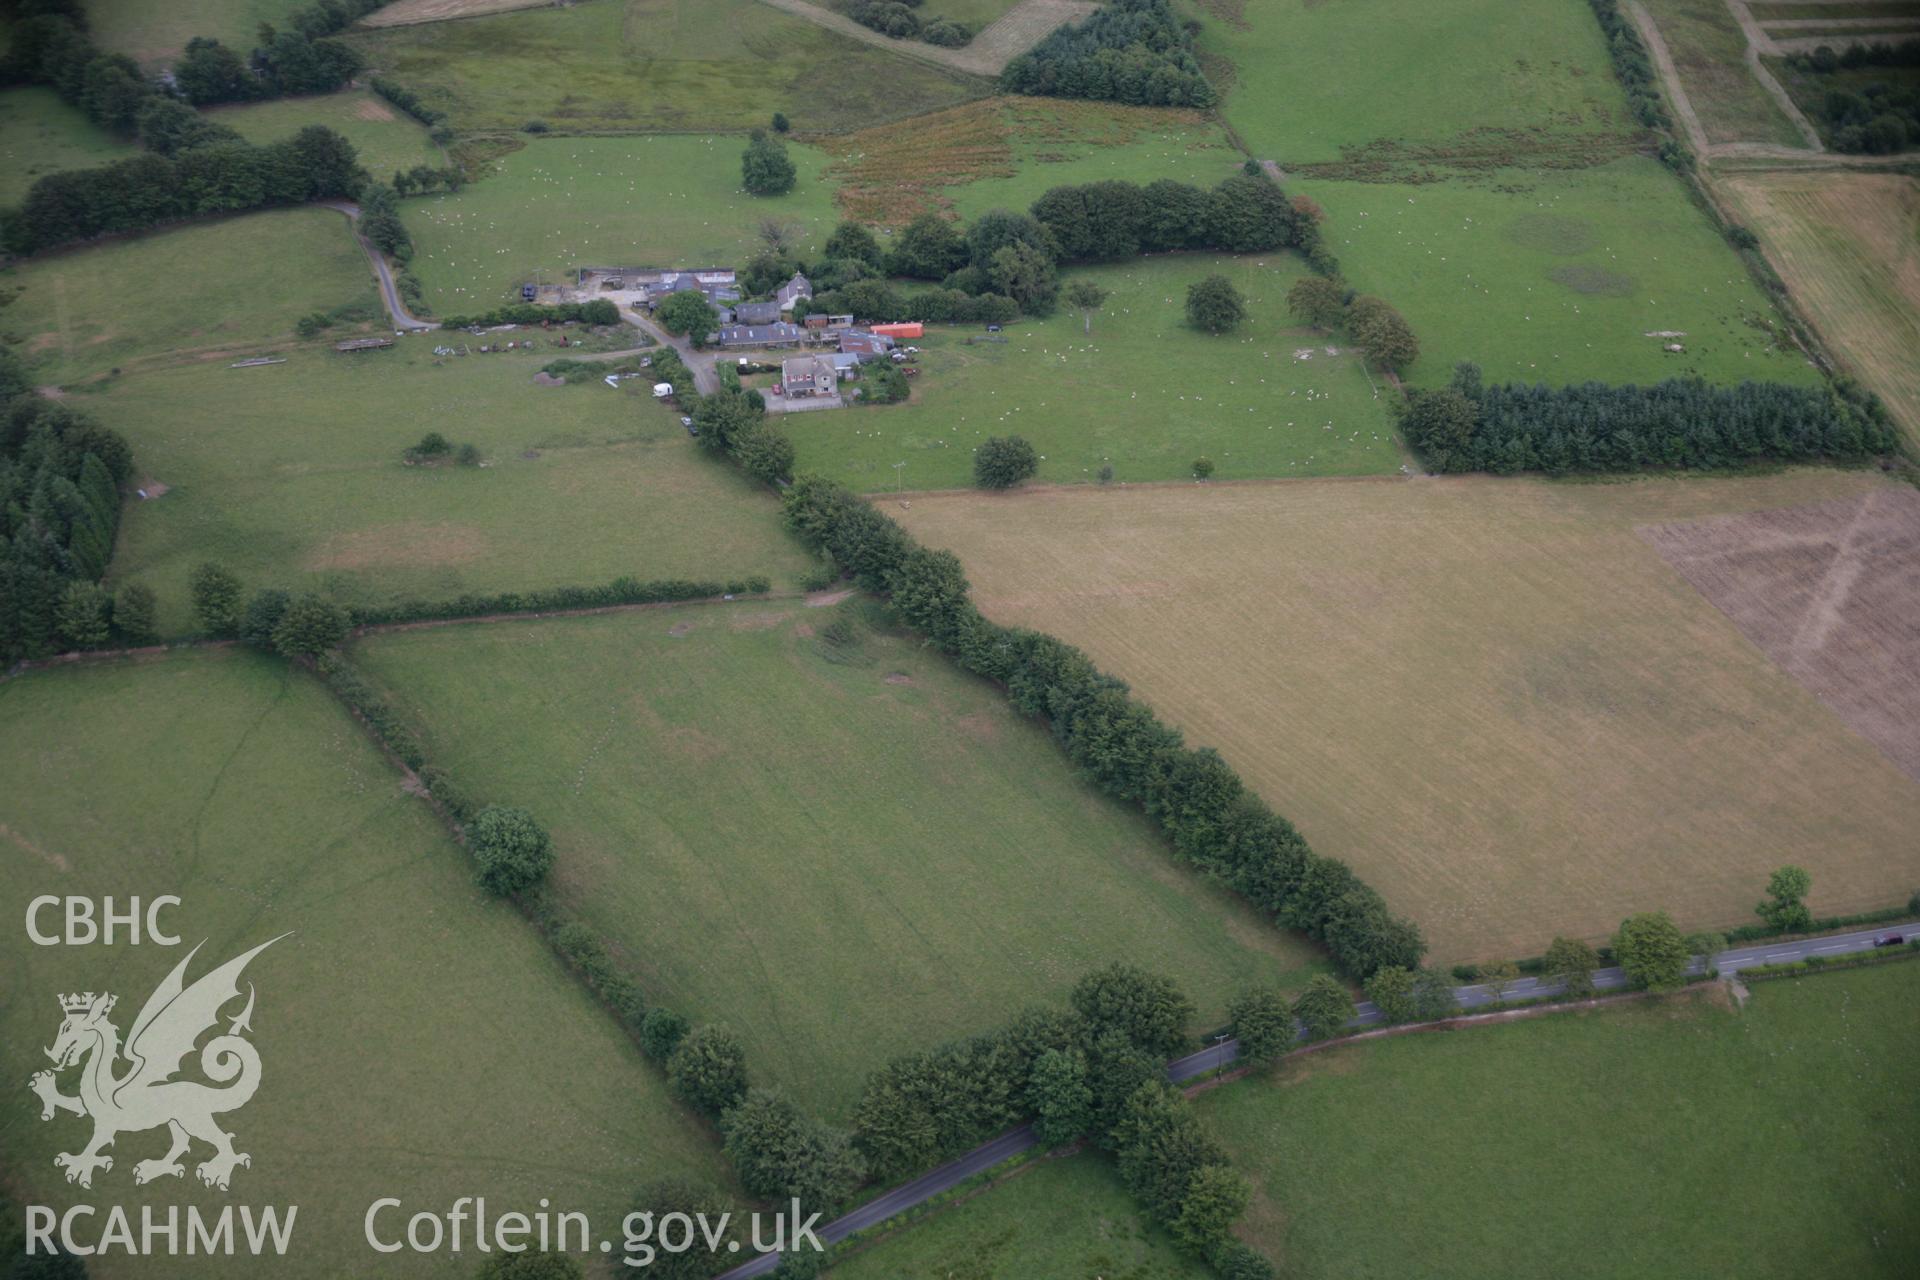 RCAHMW colour oblique aerial photograph of Sarn Helen Roman Road passing Taihirion-Rhos. Taken on 27 July 2006 by Toby Driver.